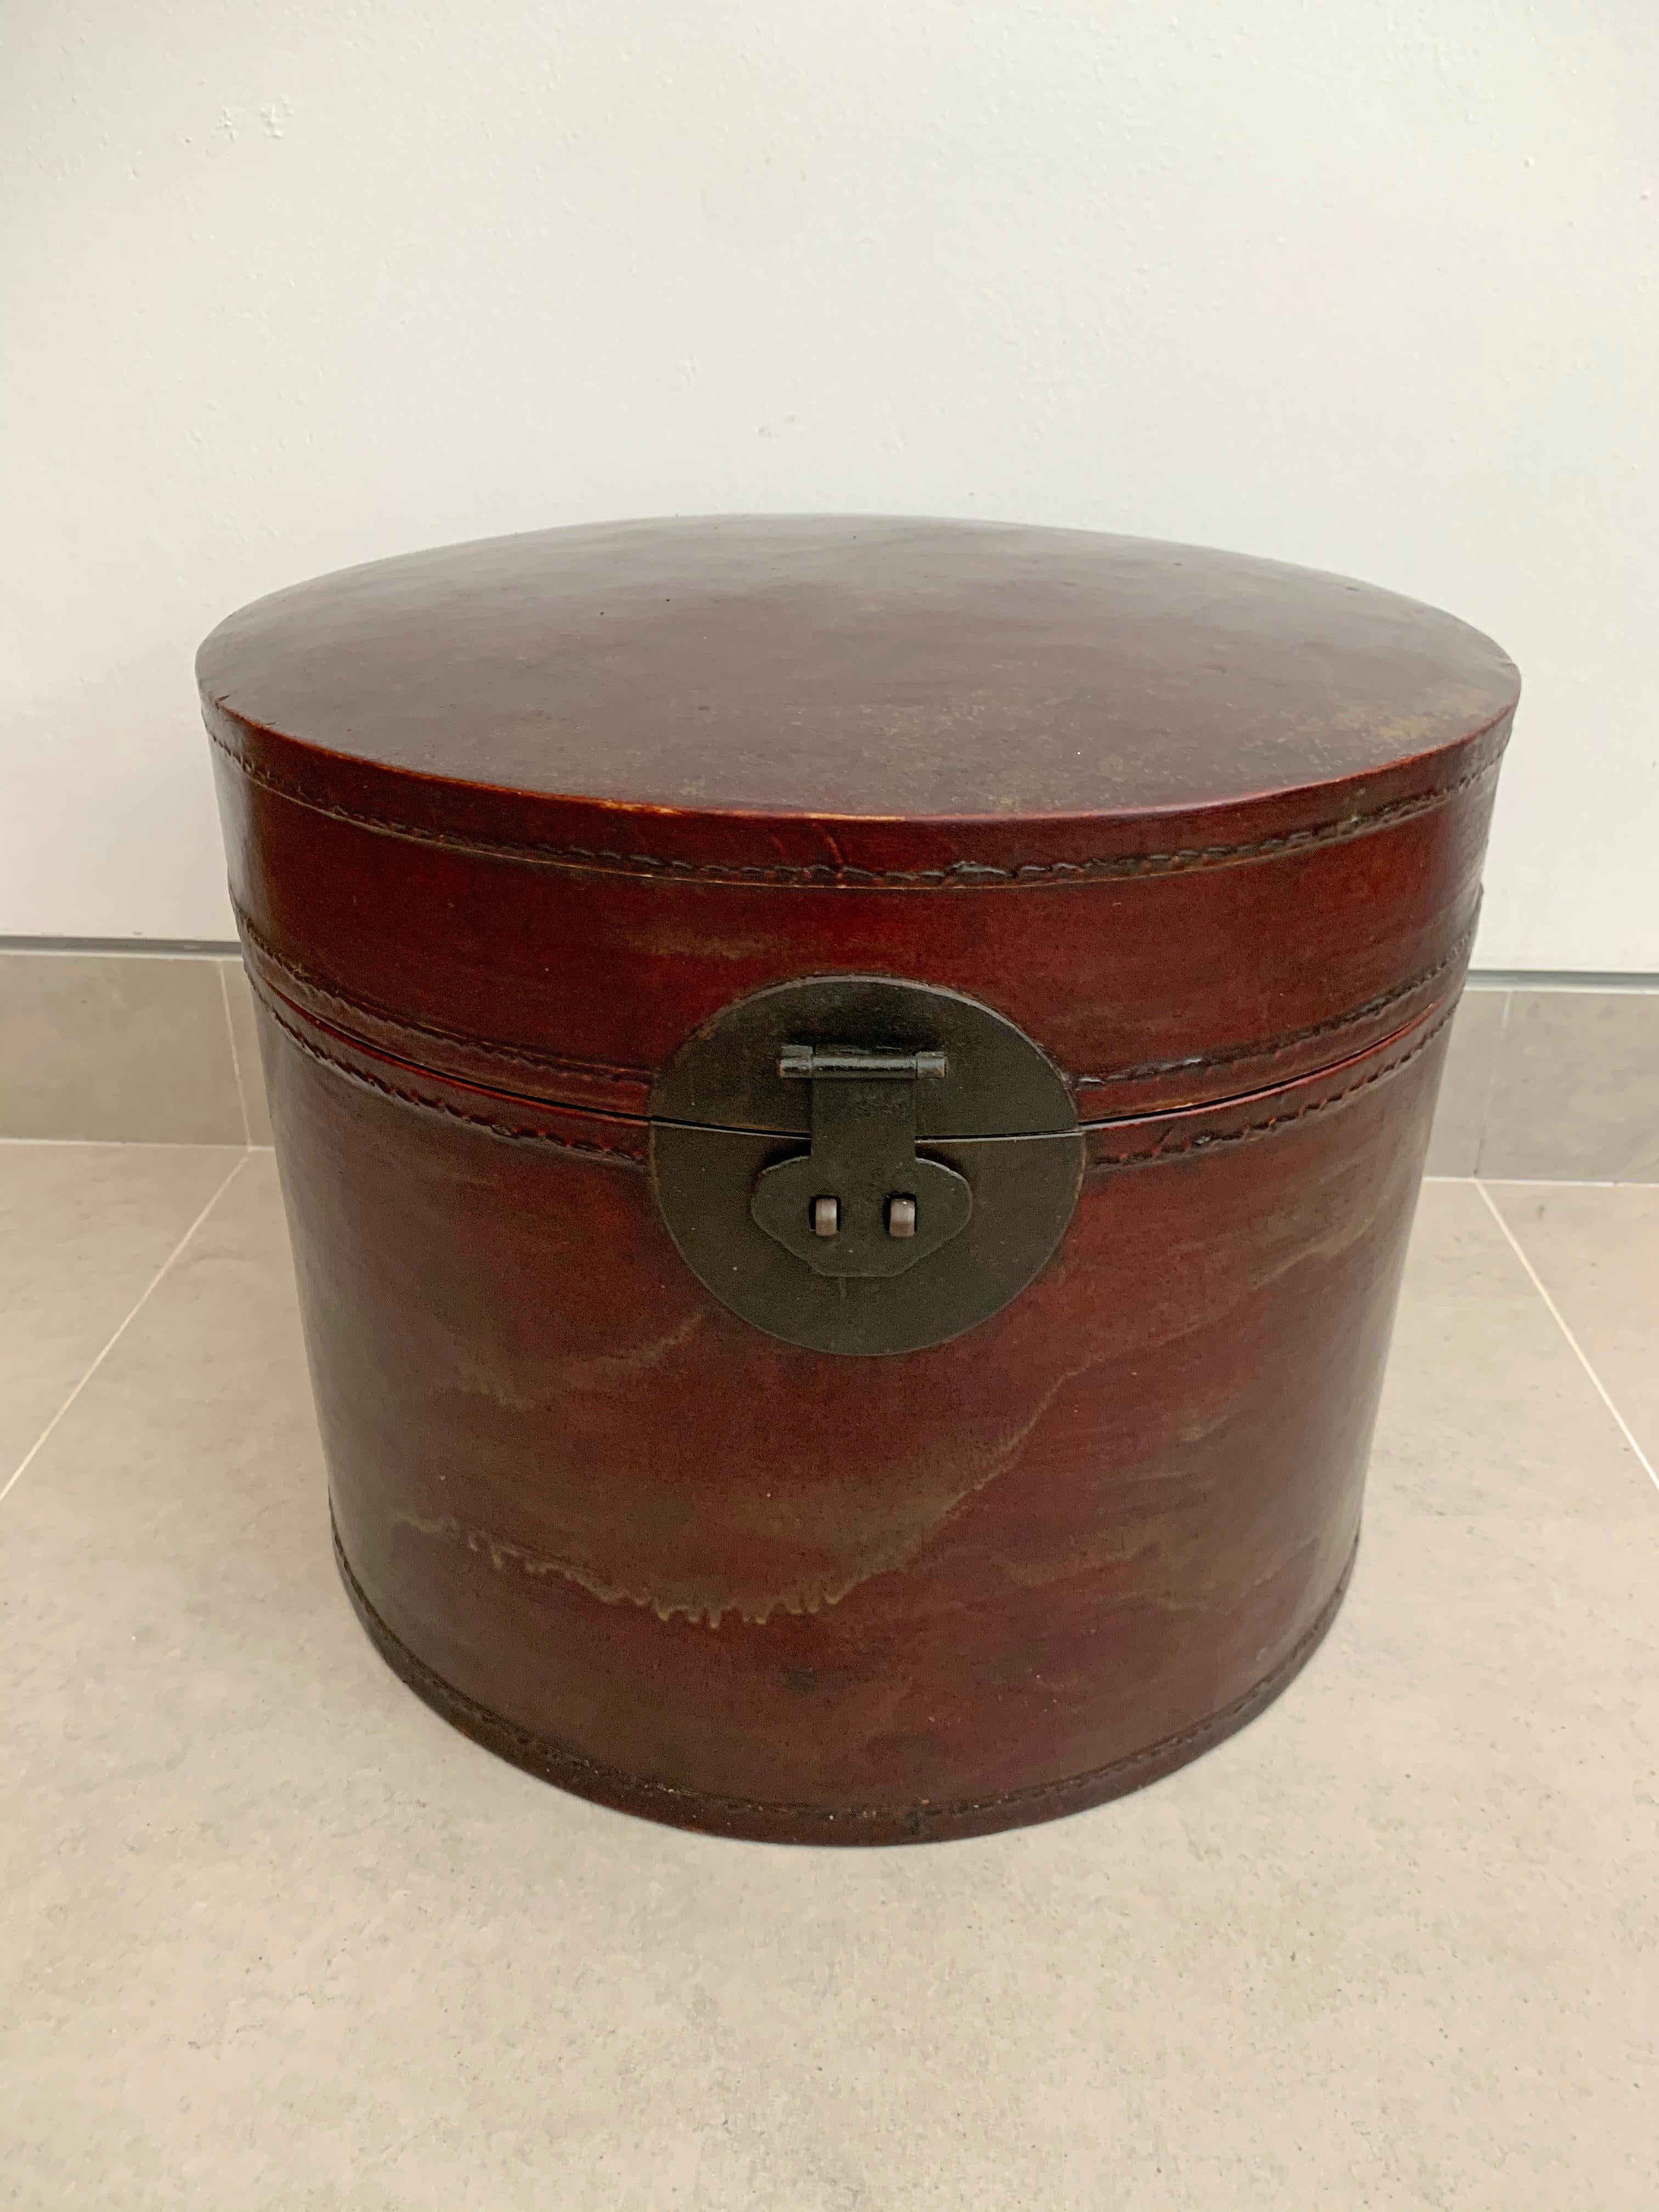 Amid the Qing Dynasty Hats were a form of status symbol, so much so that the boxes to protect and preserve these hats were also elegantly crafted. This late 19th-century hat box is crafted from lacquered leather and once belonged to someone high